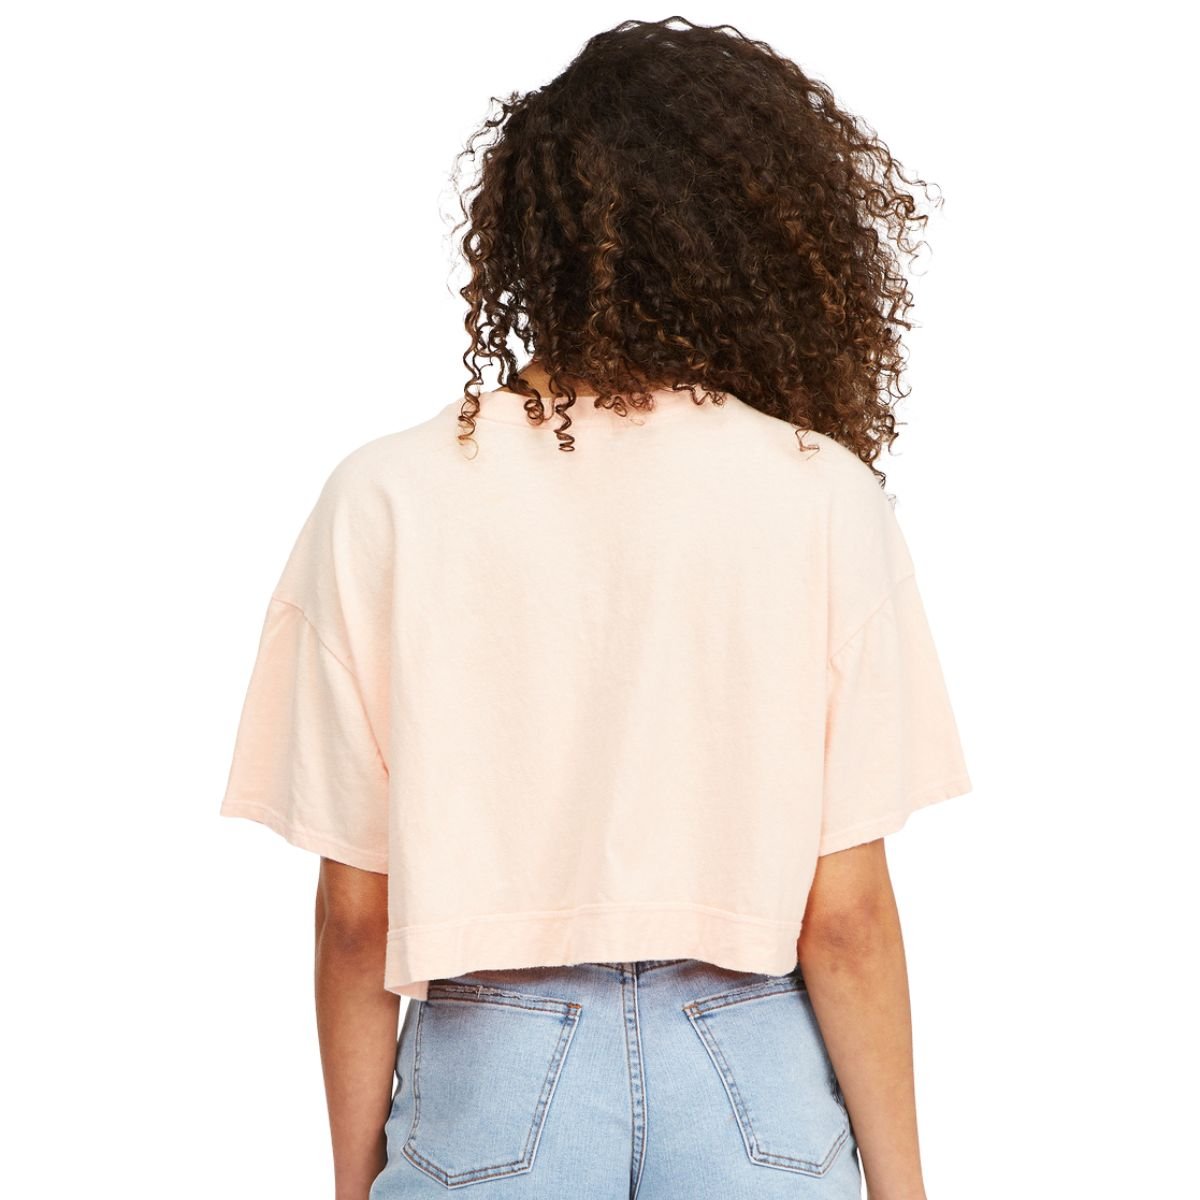 Billabong Only Today Tee in Just Peachy - BoardCo